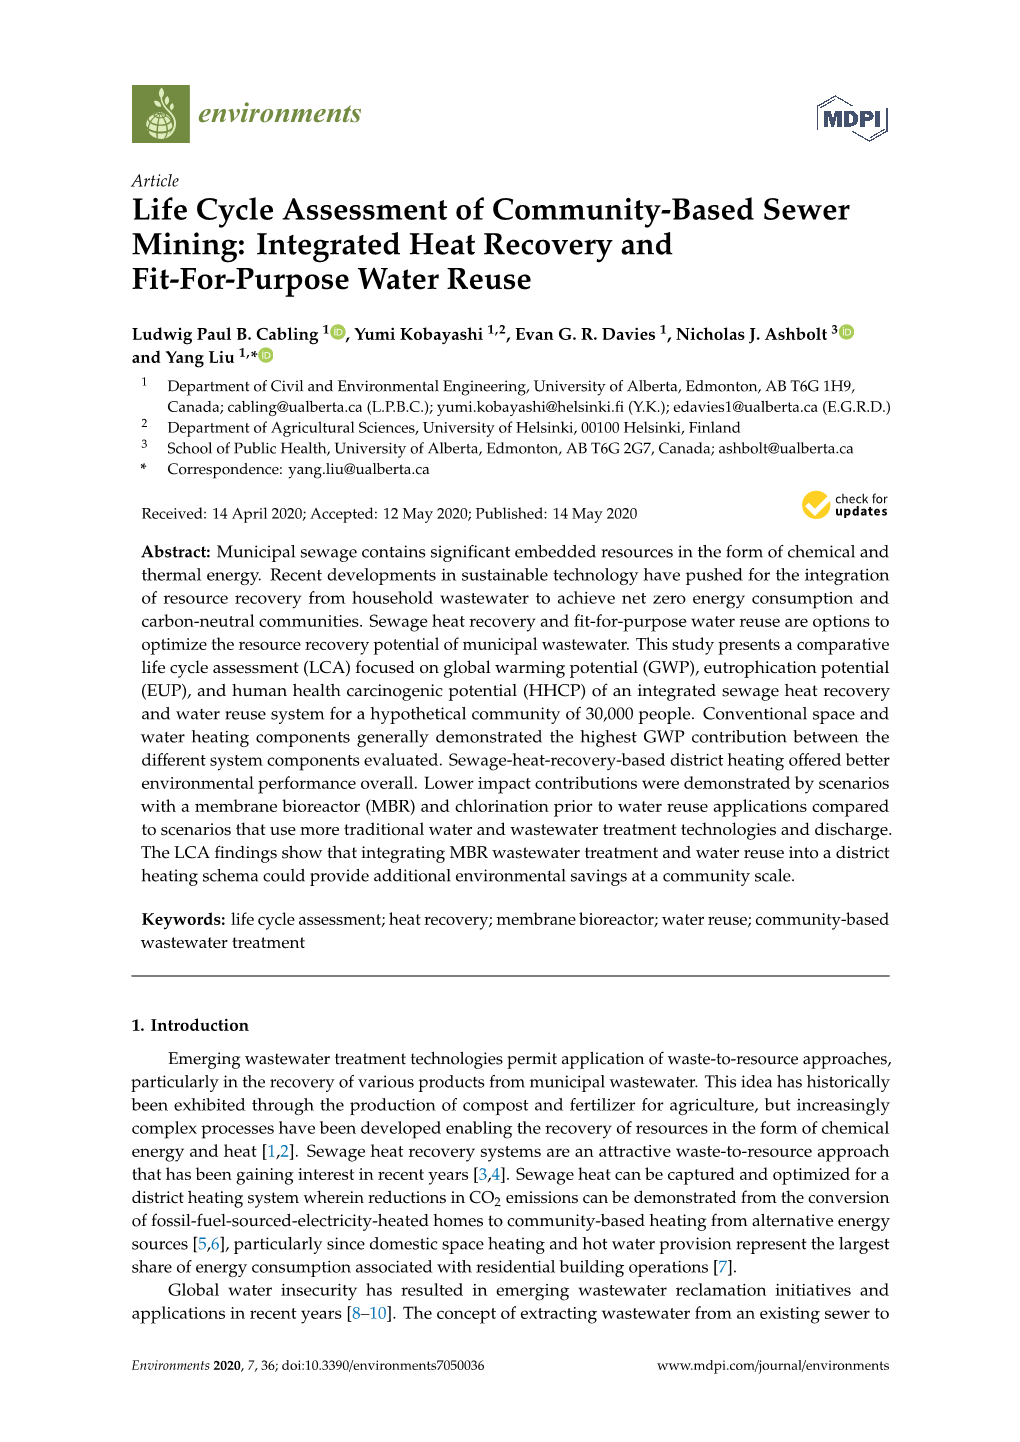 Life Cycle Assessment of Community-Based Sewer Mining: Integrated Heat Recovery and Fit-For-Purpose Water Reuse